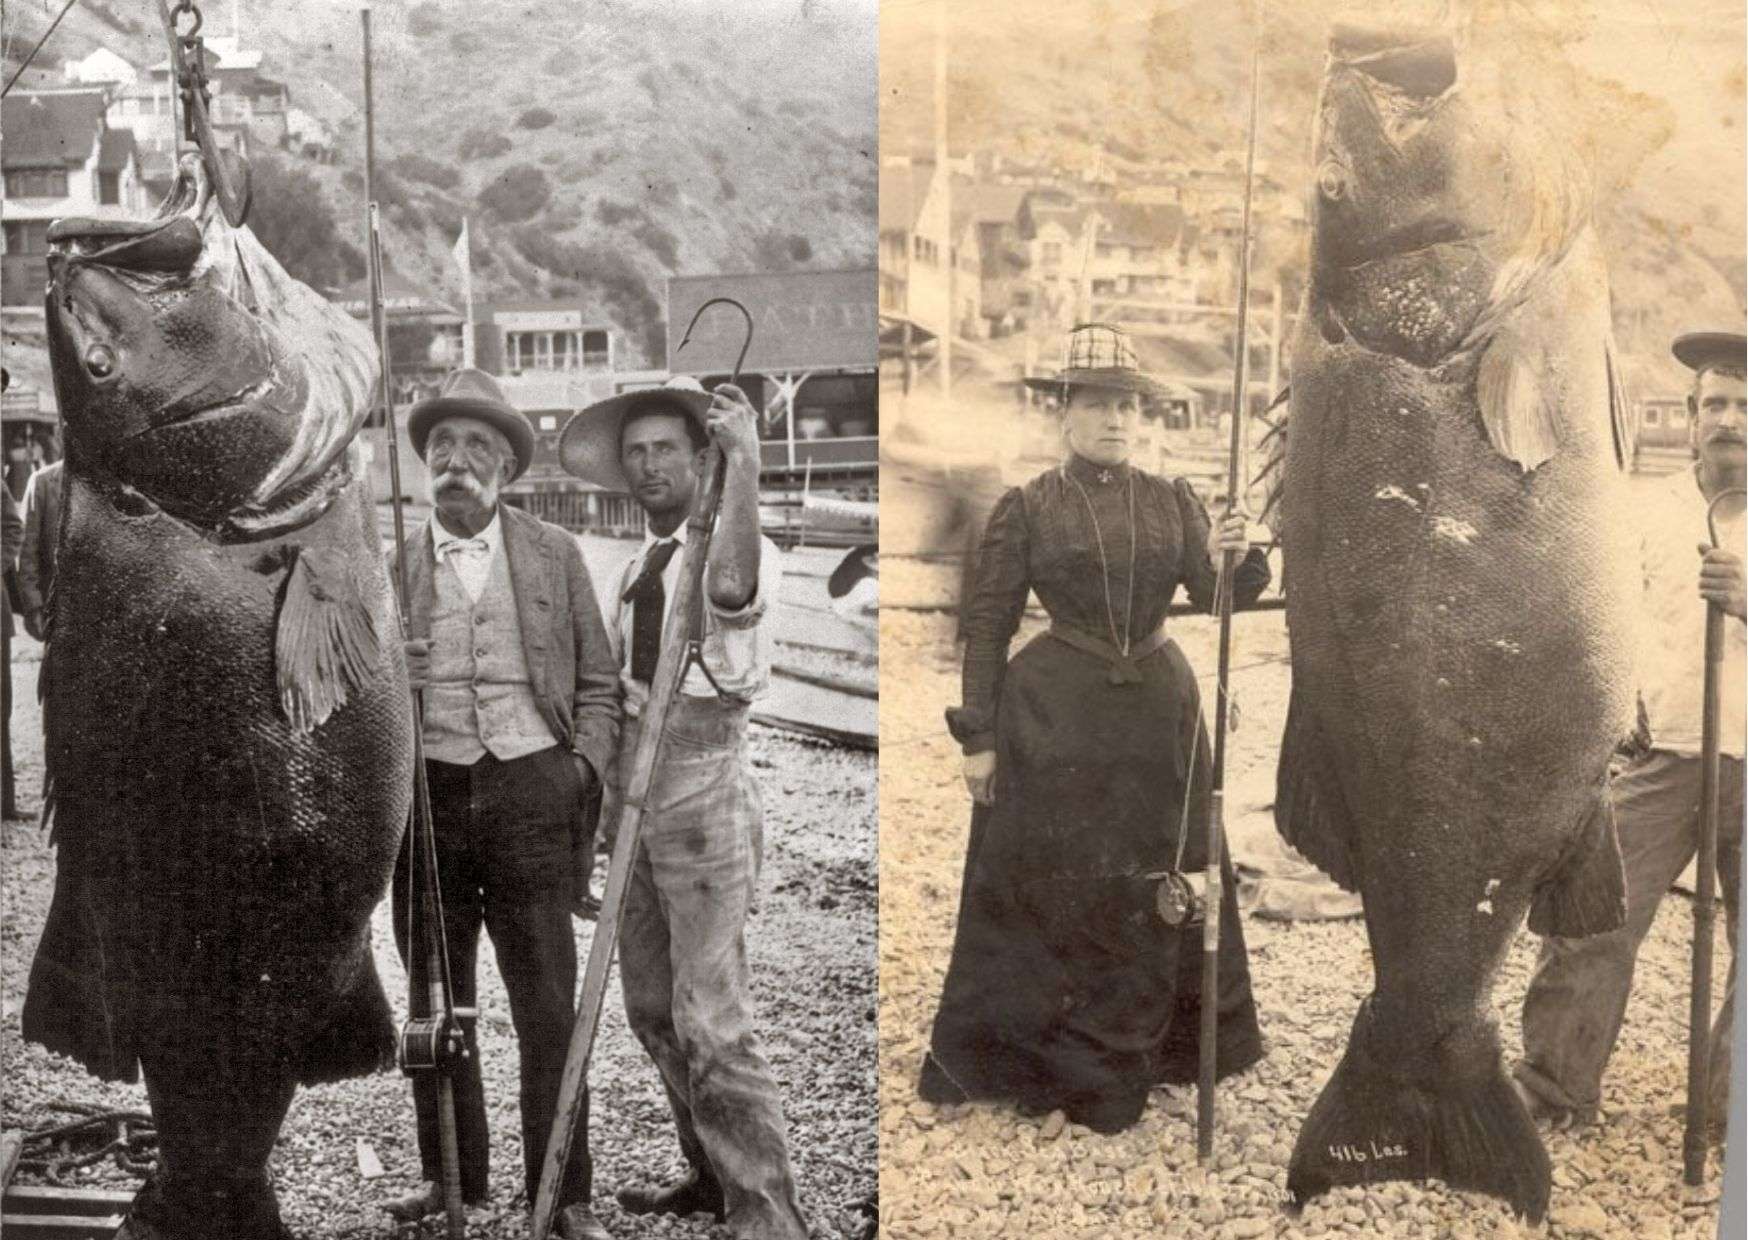 Interesting Photos Of Fishermen With Their Big Fish Catches In The Past